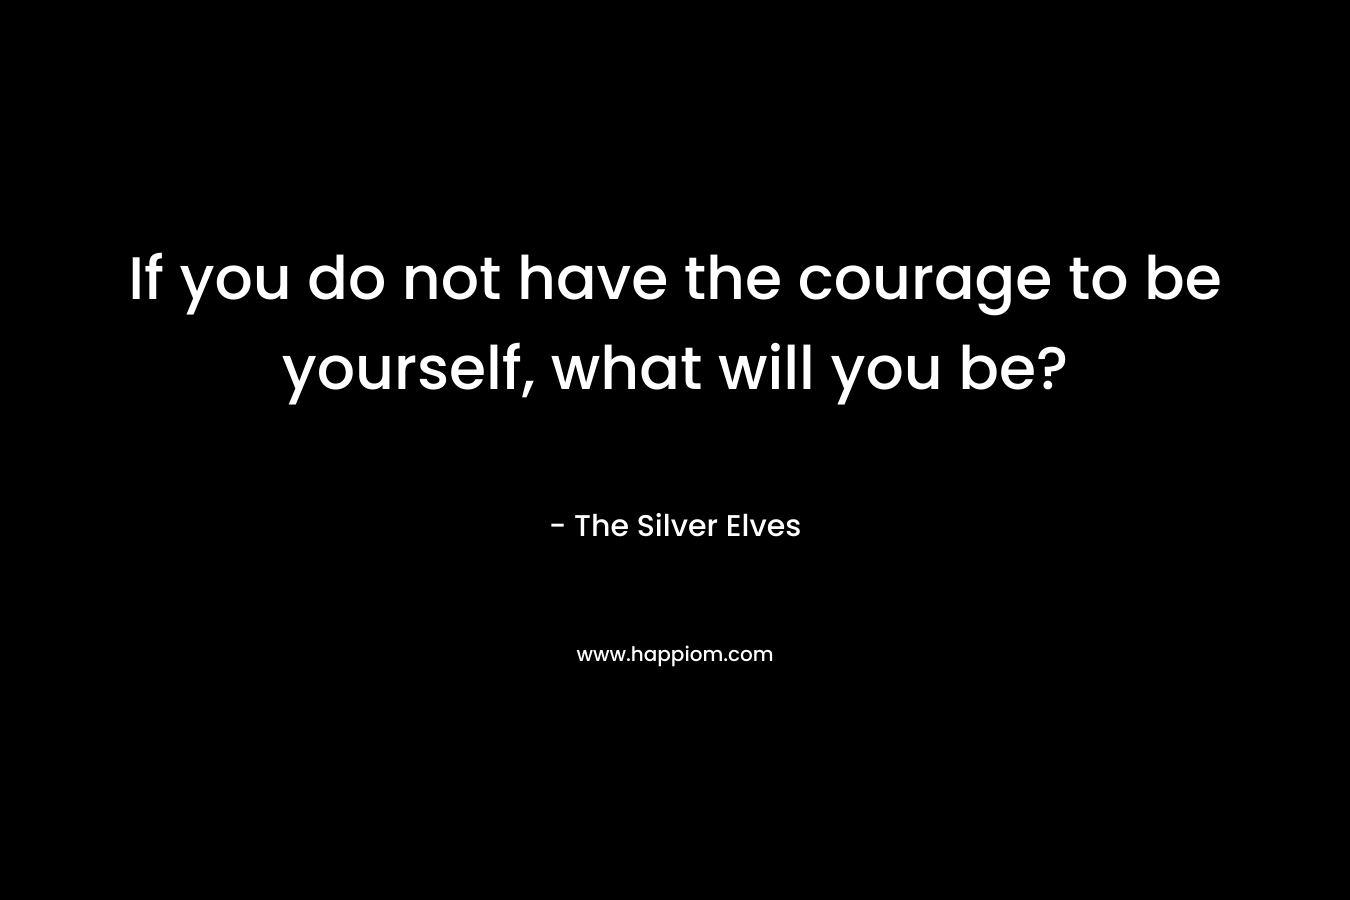 If you do not have the courage to be yourself, what will you be? – The Silver Elves